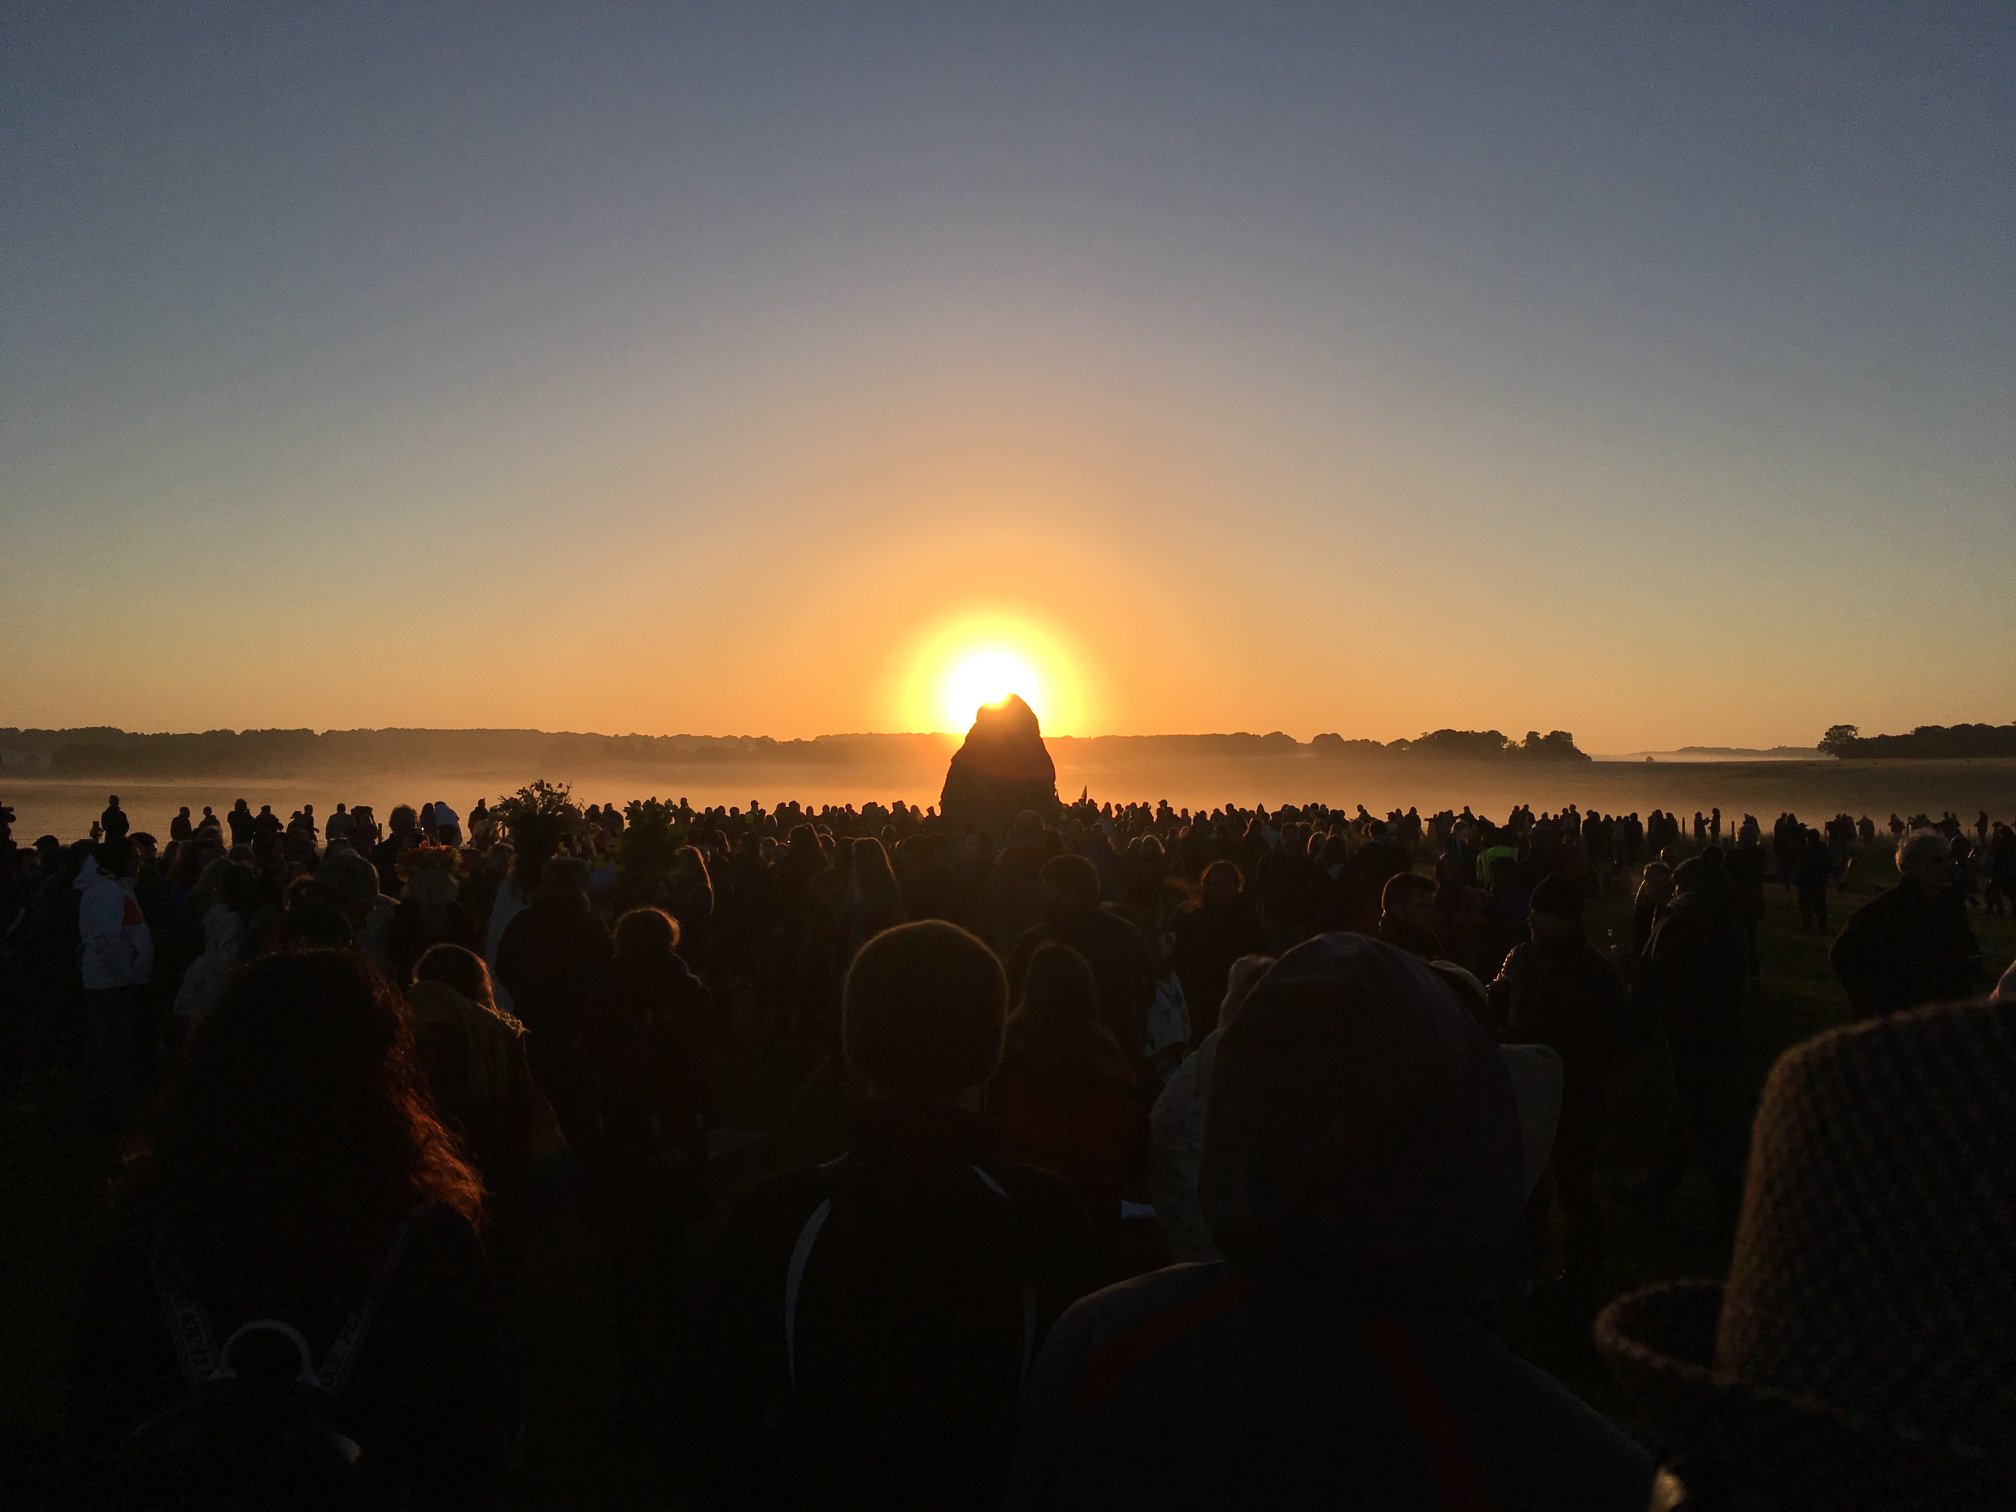 a crowd of people all standing close together, while the sun rises in the distance.